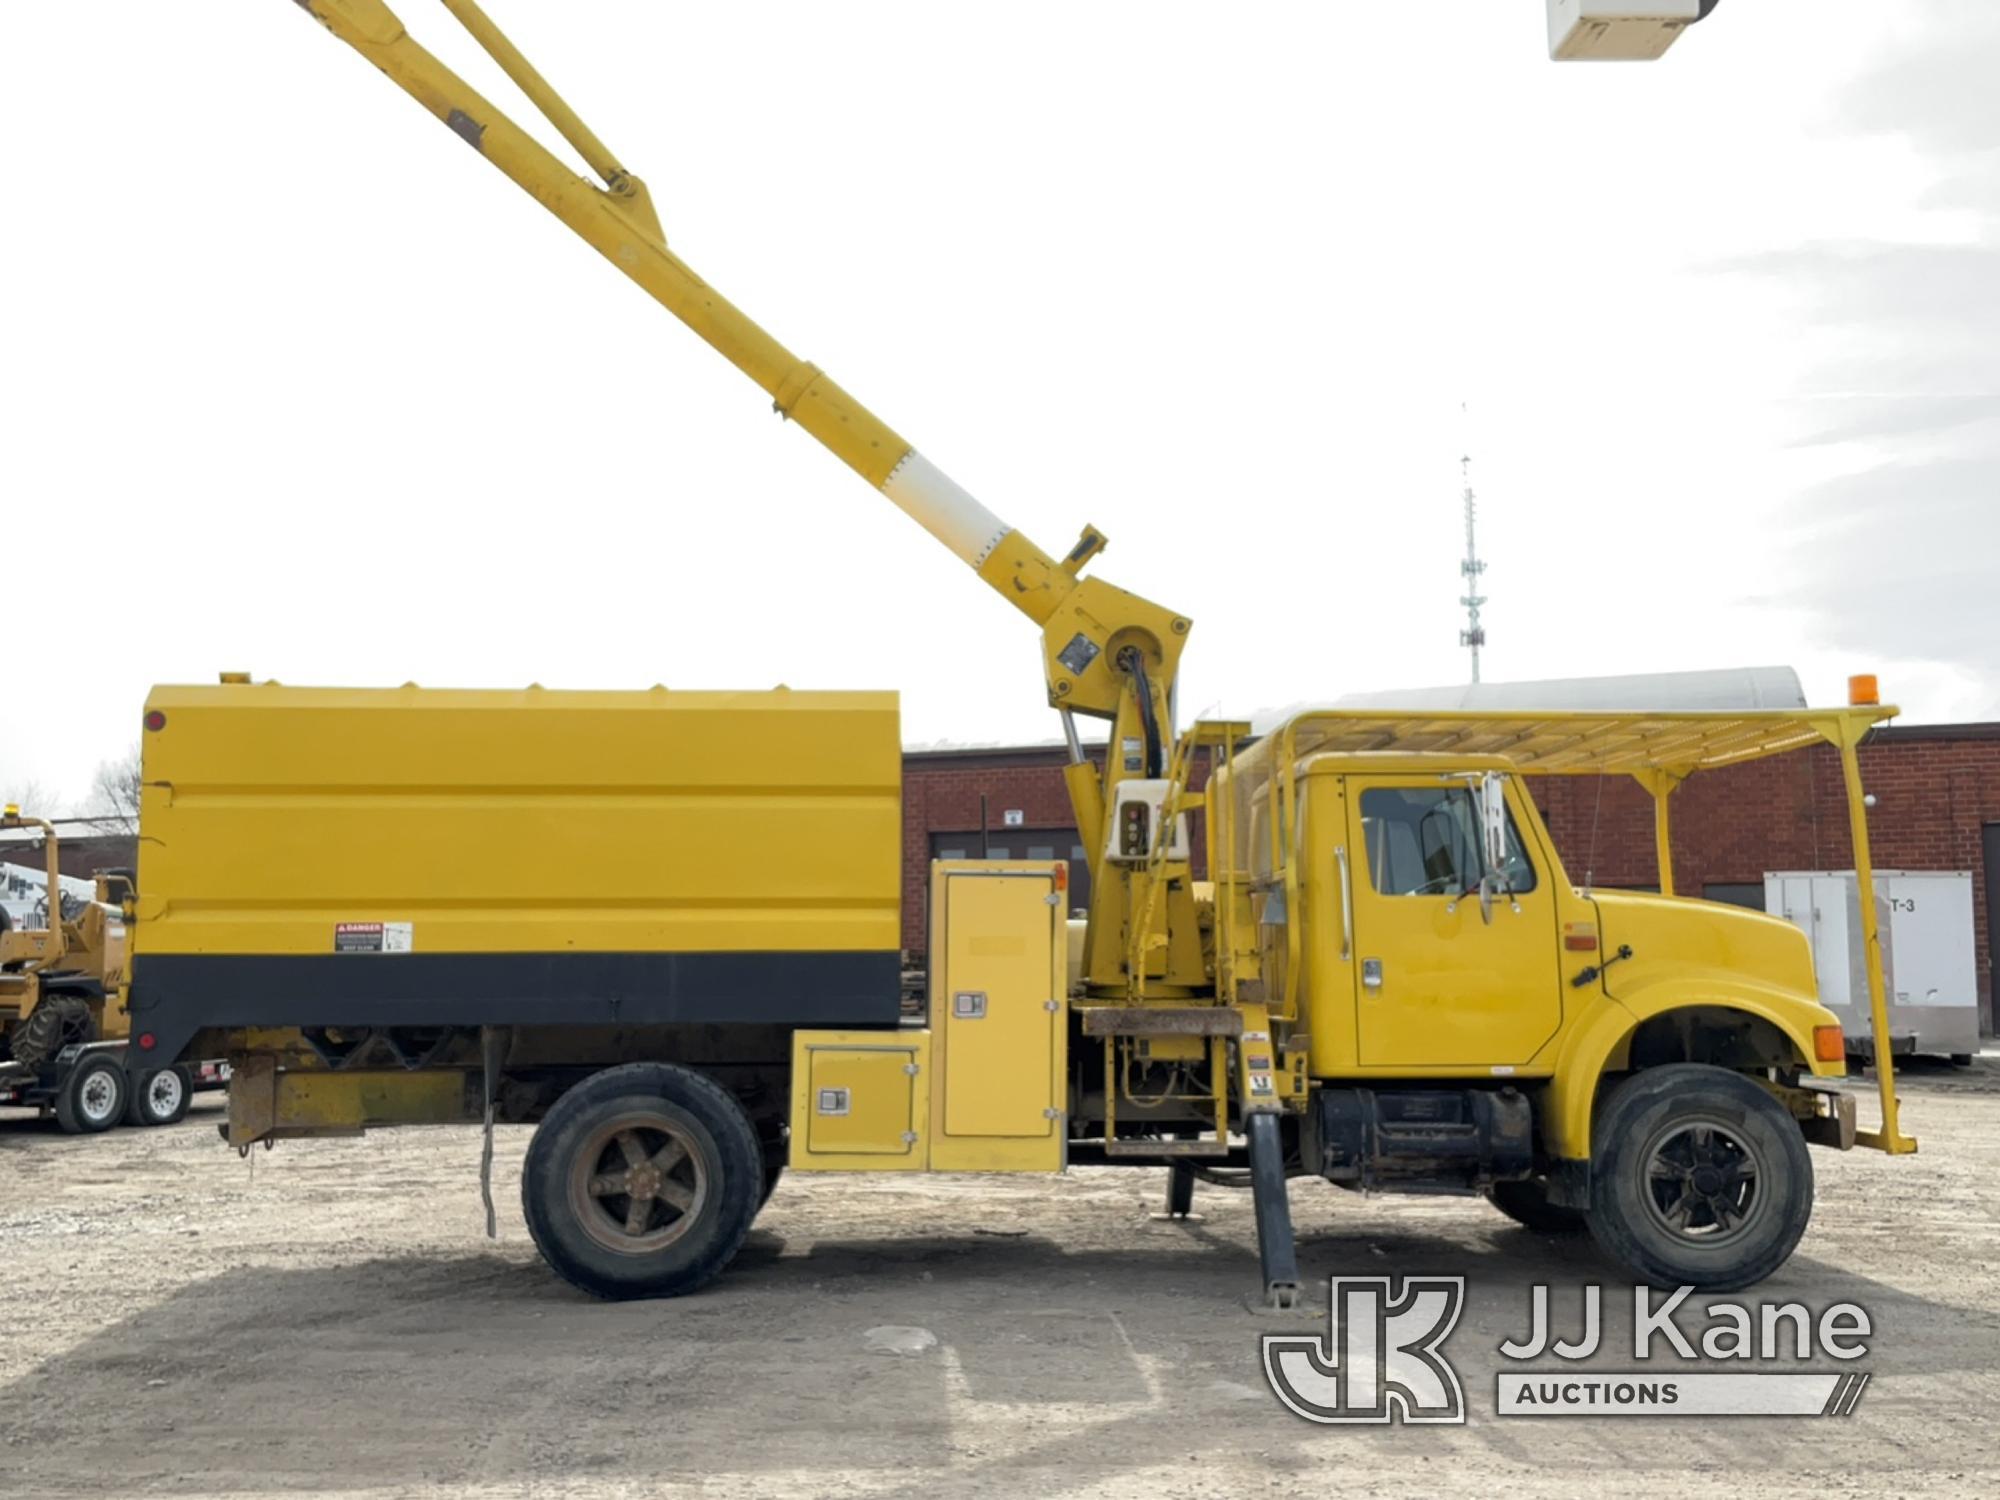 (Des Moines, IA) Altec LB650A, Bucket Truck mounted behind cab on 1994 International 4900 Chipper Du